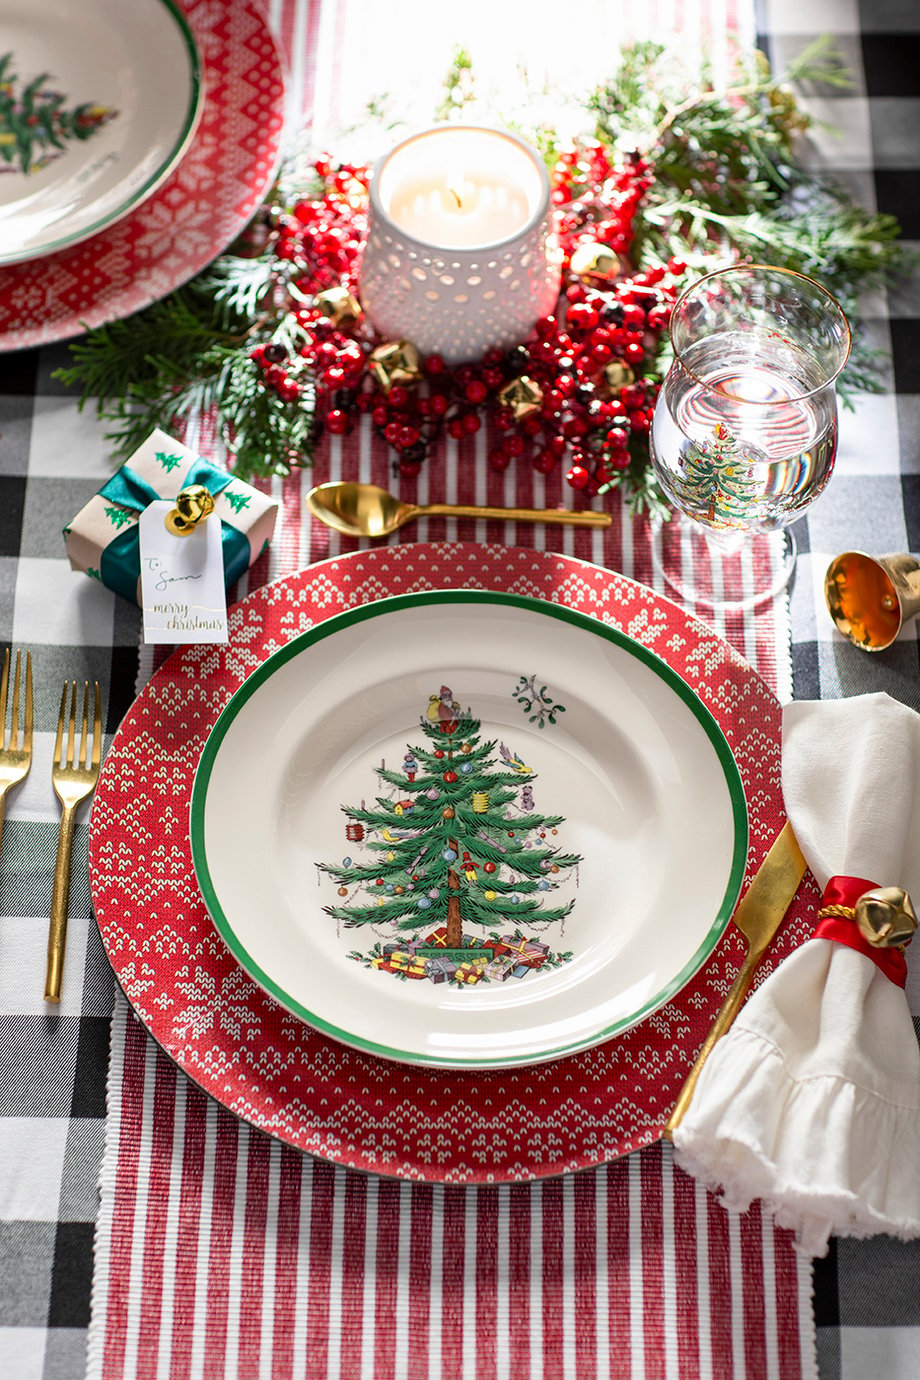 Image from Wayfair's holiday catalog shot by Amy Rose Productions